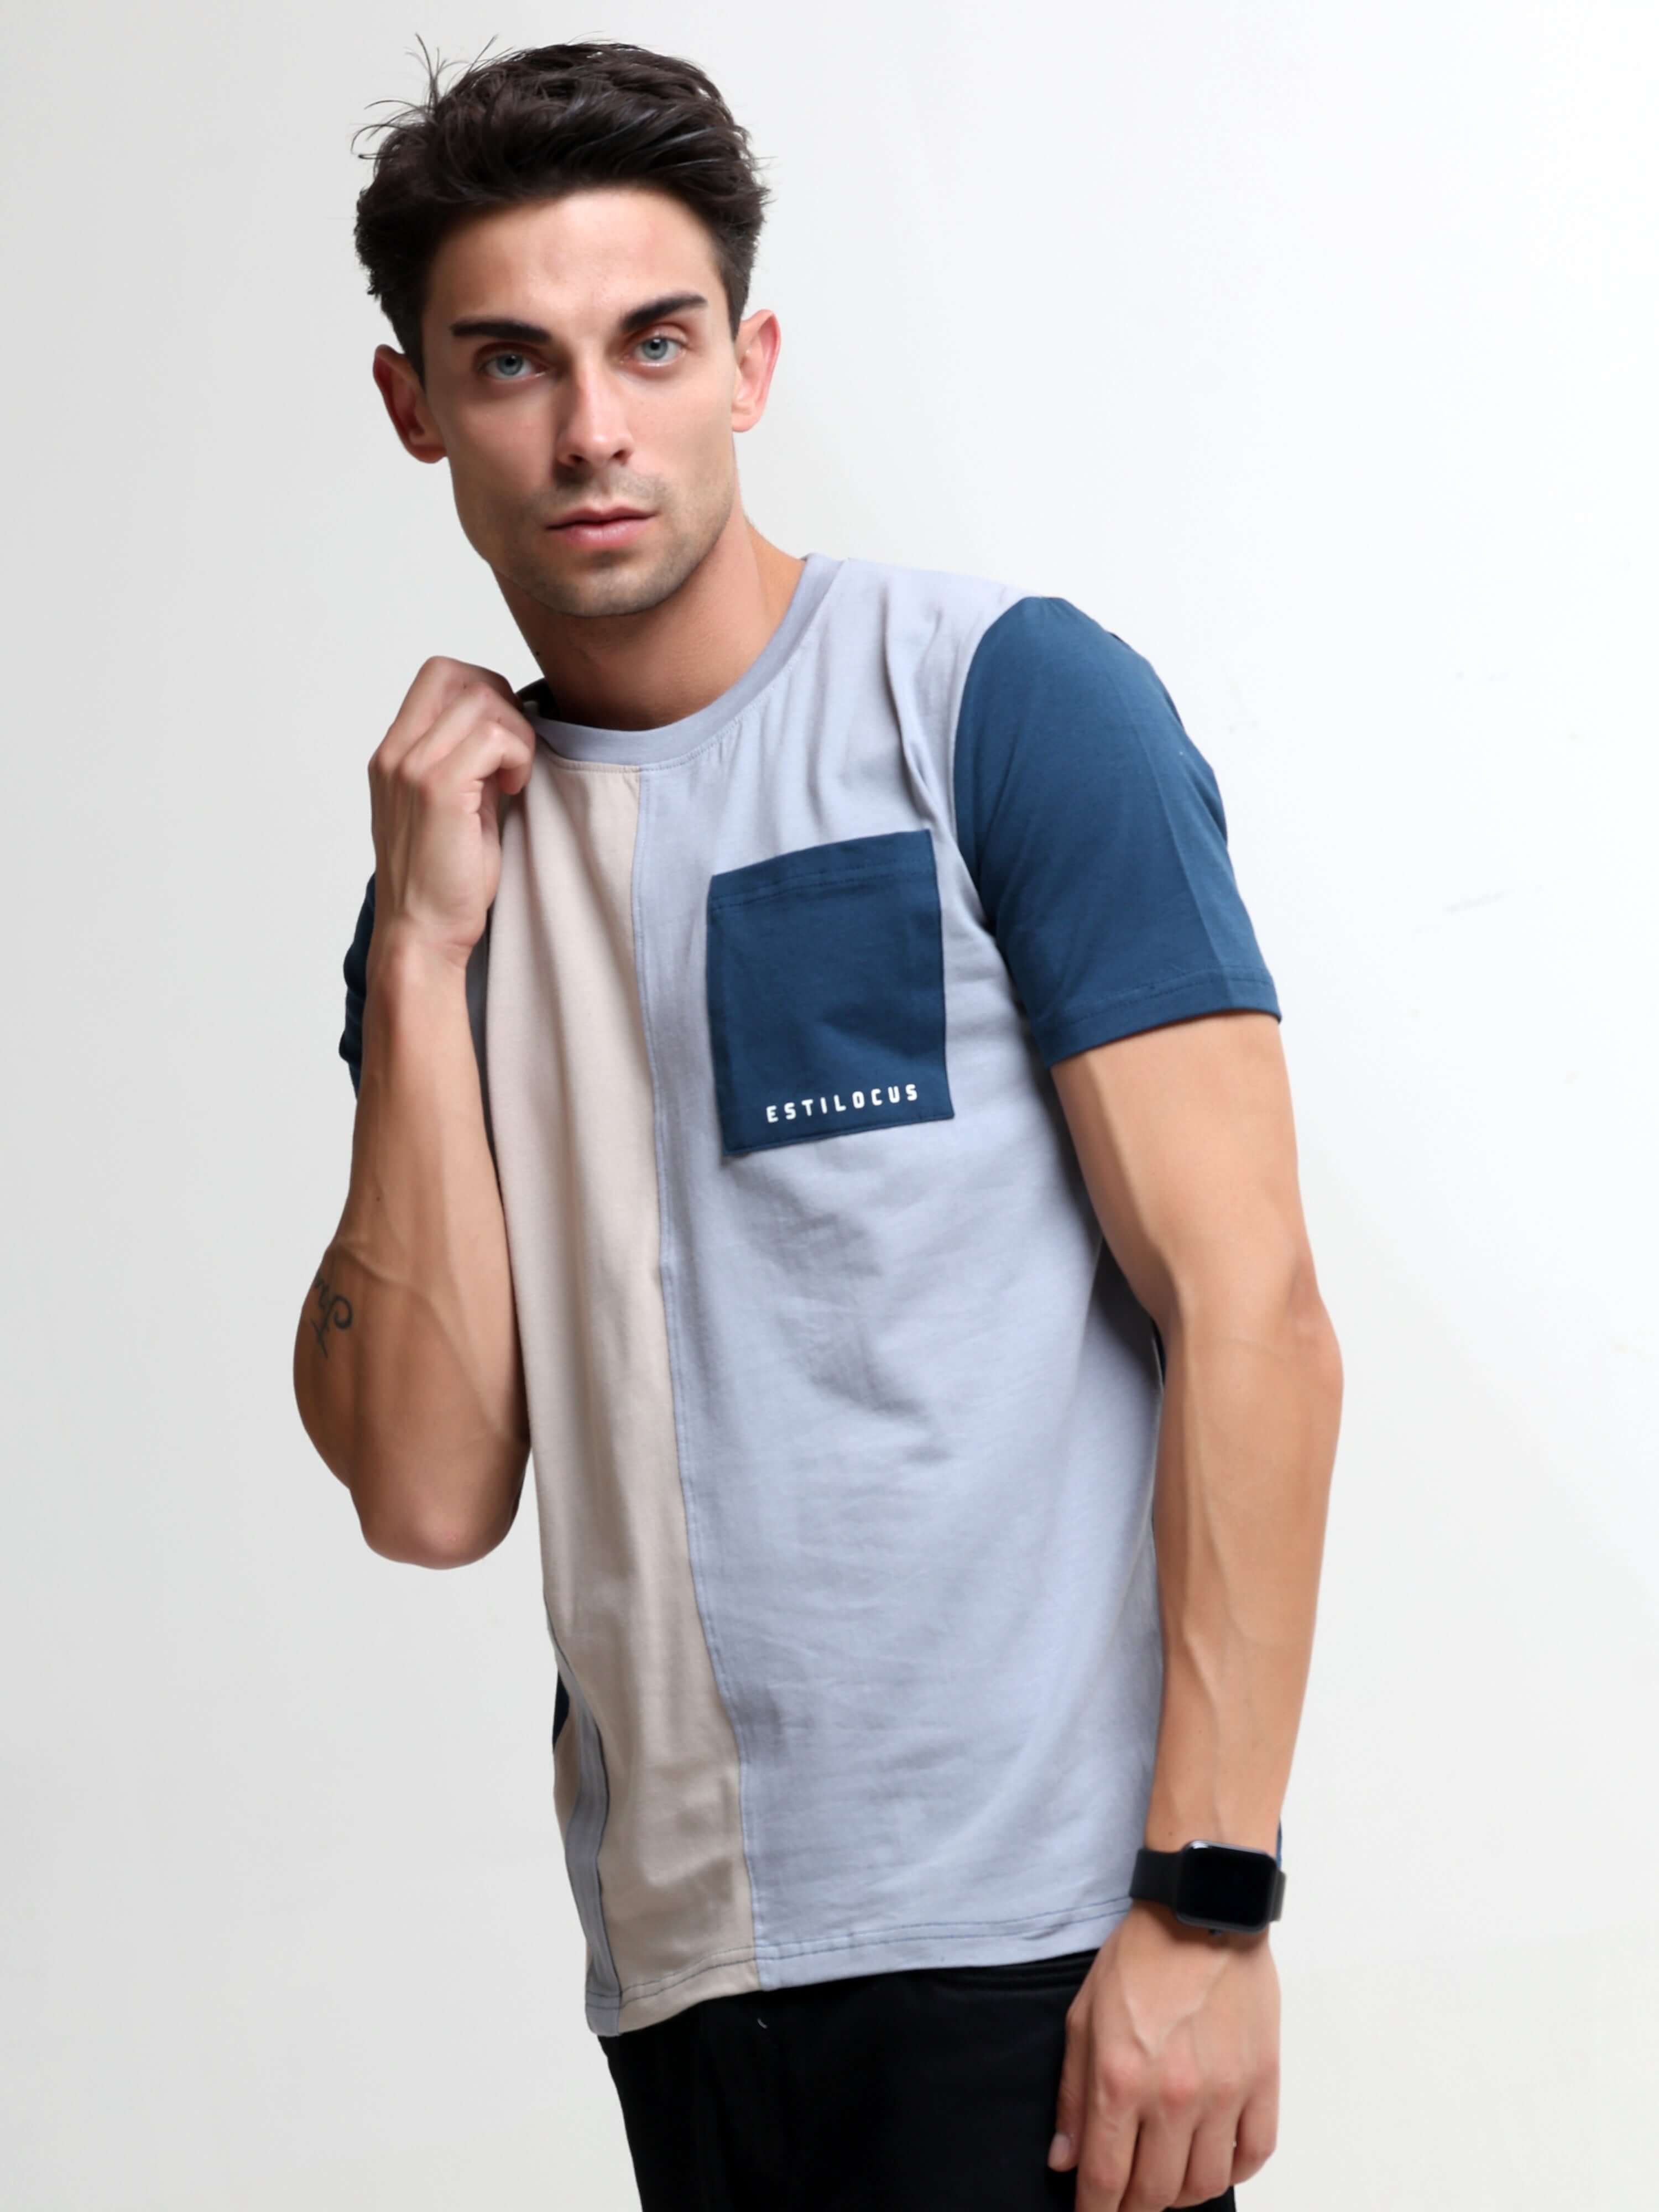 Surge enamel blue light weight tshirt shop online at Estilocus. This relax-fit Cut and Sew T-shirt is comfortable and the perfect essential all year round. Pair it with white jeans and sneakers and layer it up with a denim jacket for a casual and put-toge